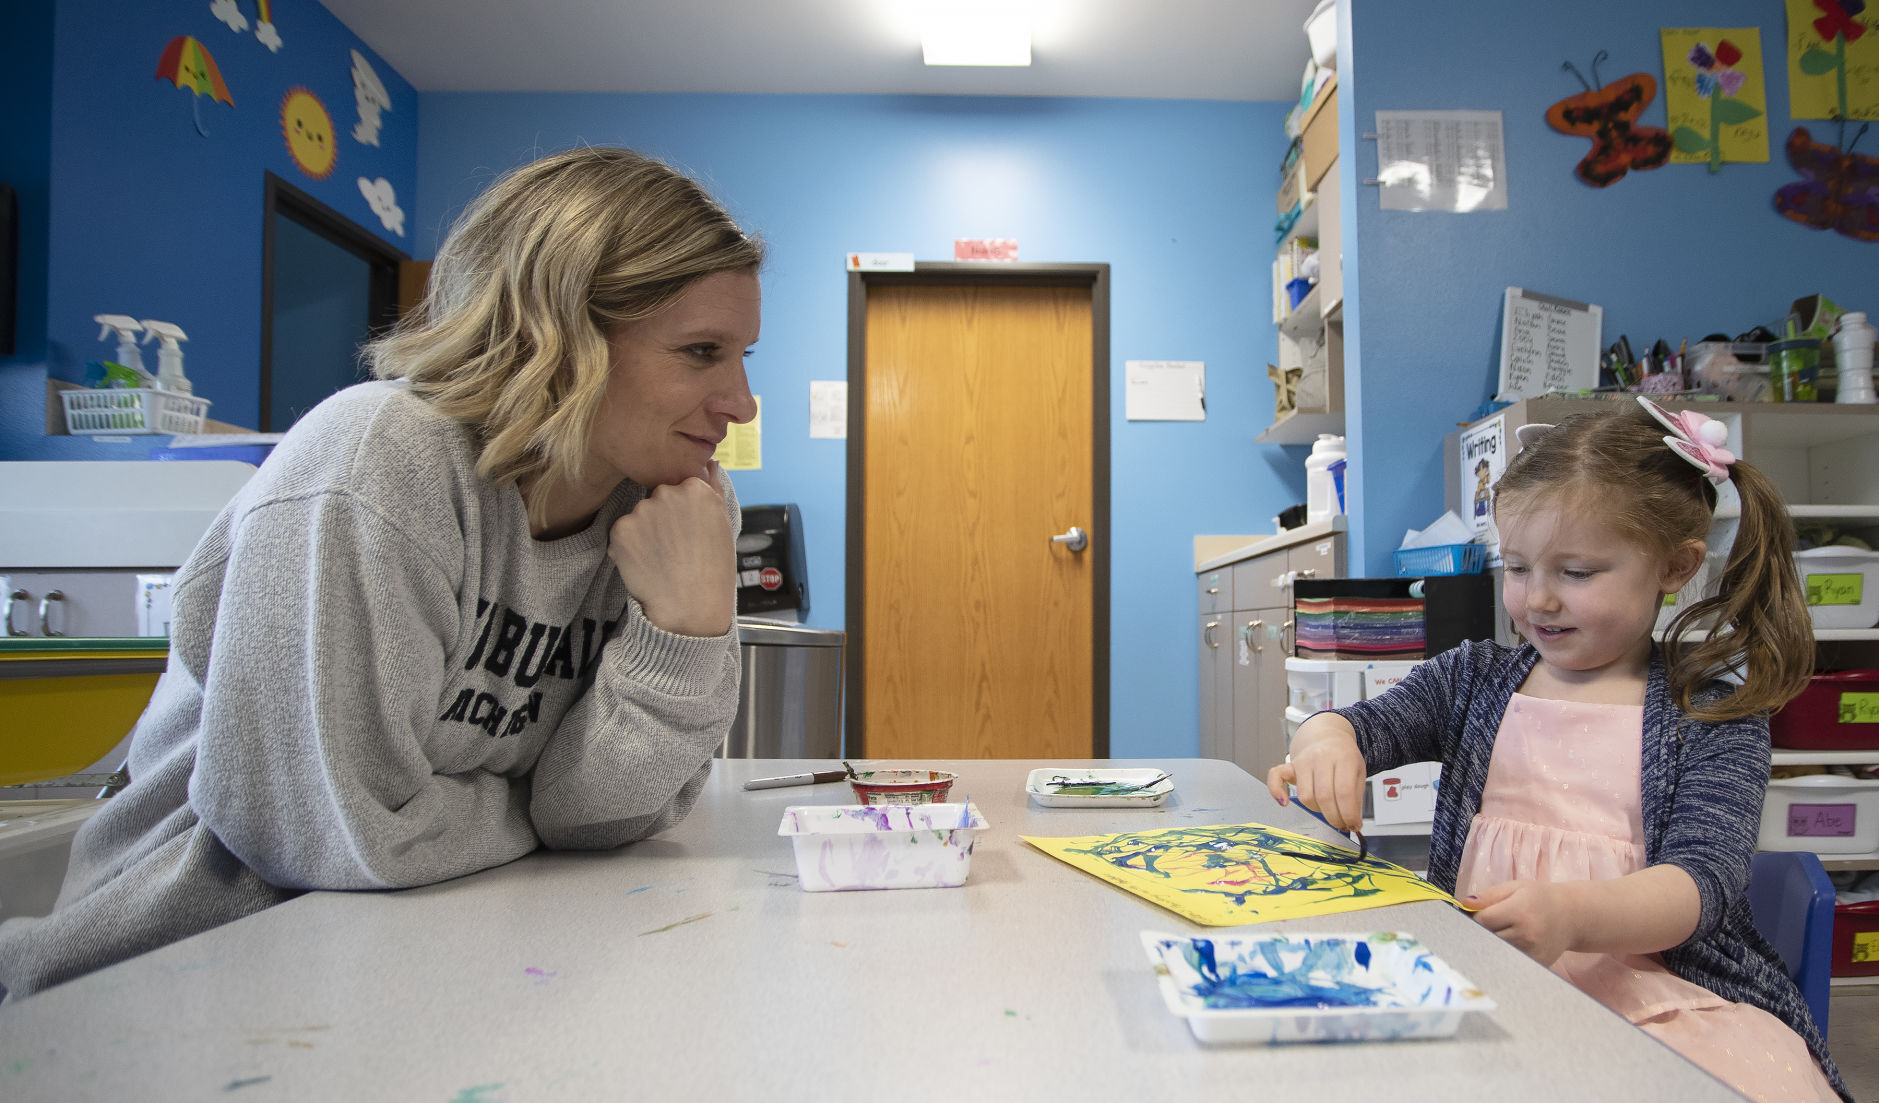 Young-Uns teacher Nicole Thill watches as Eden Peterson, 3, paints at Young-Uns Child Care on Monday, April 18, 2022.    PHOTO CREDIT: Stephen Gassman